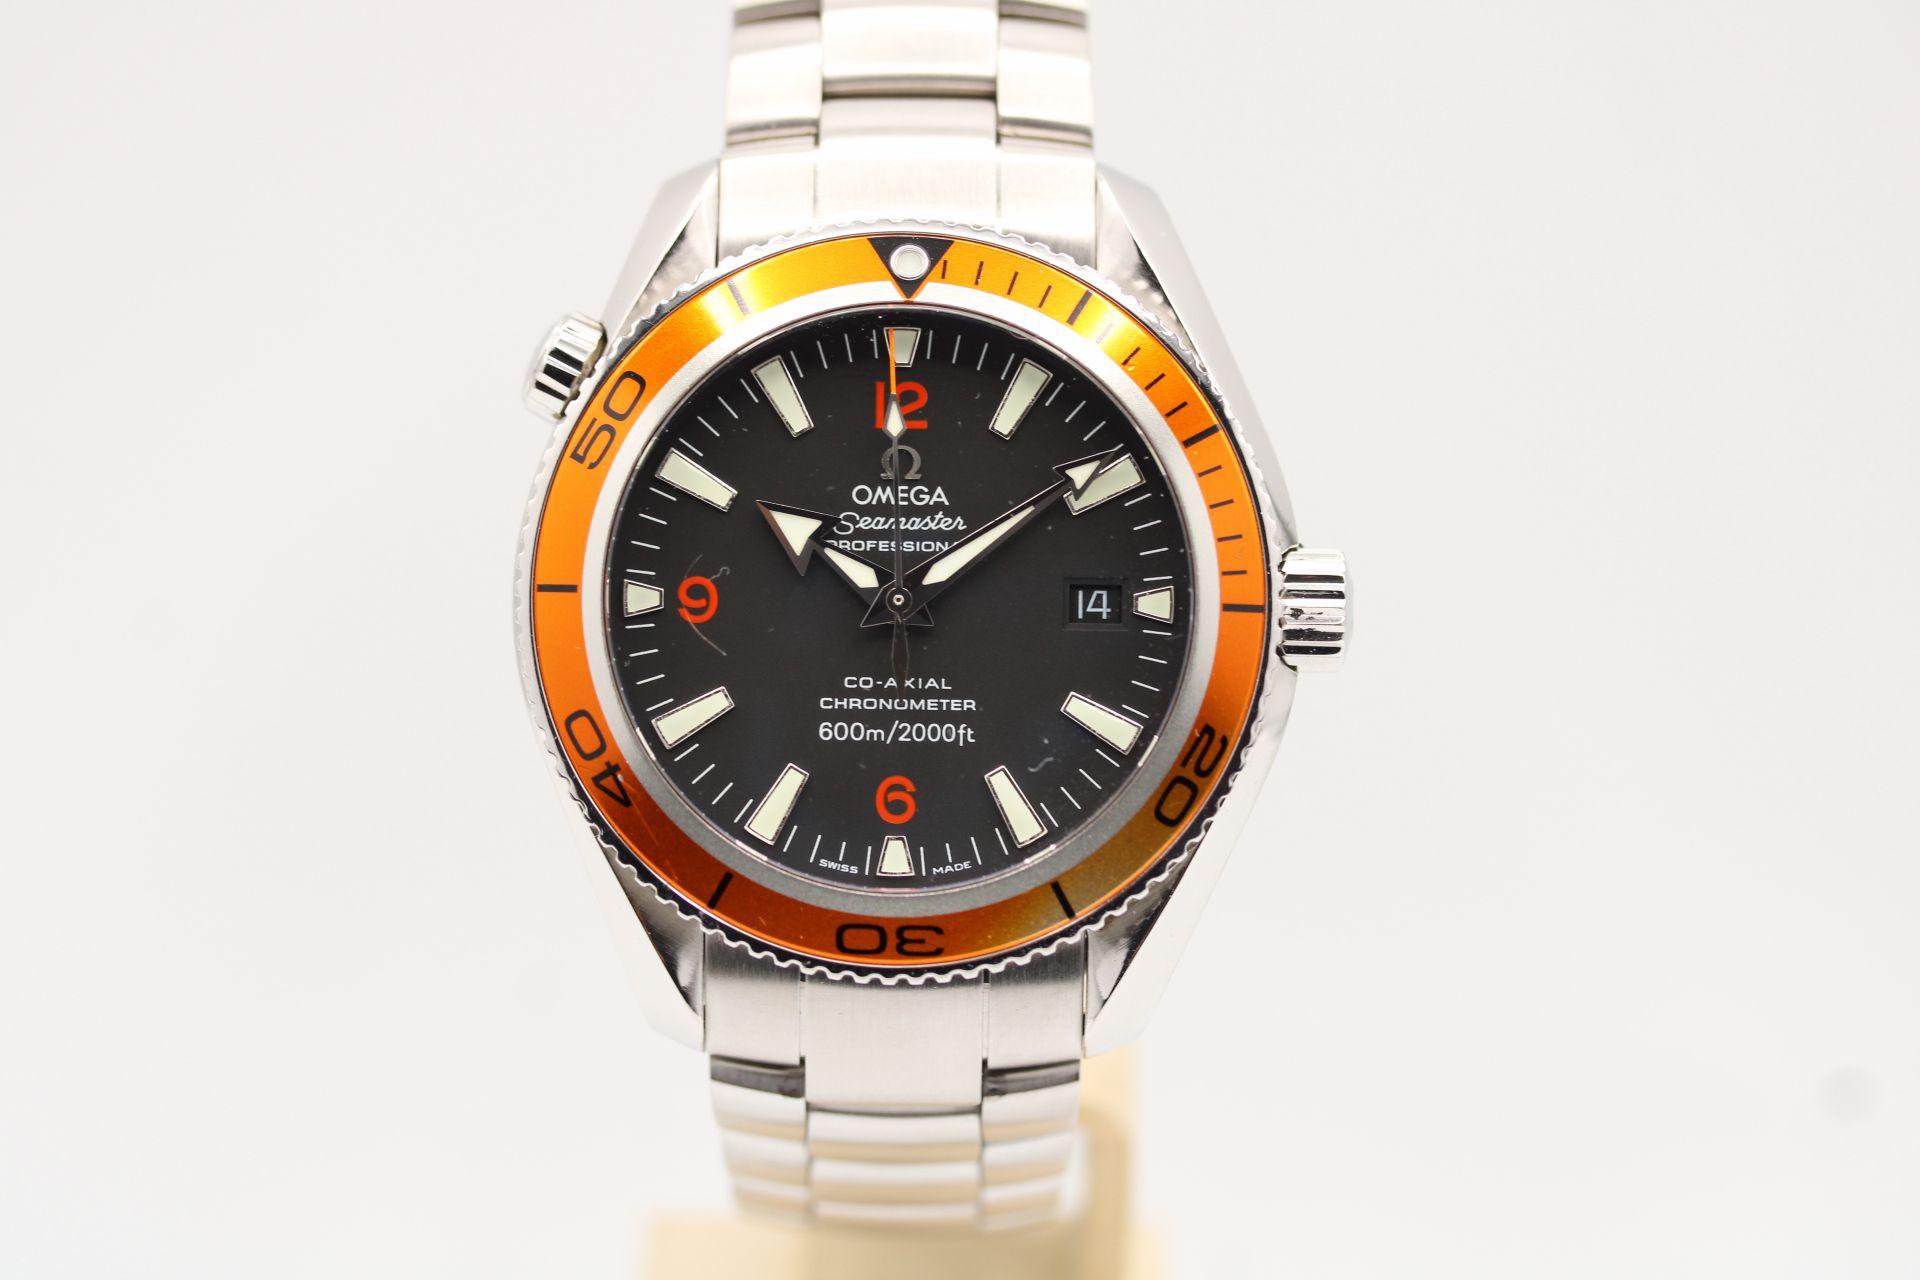 Watch: Omega Seamaster Planet Ocean 2209.50.00
Stock Number: CHW5432
Price: £3400.00

A complete collectors set of this now discontinued Omega Seamaster Planet Ocean. Dated 2012 and complete with box, papers, swing tag, manual, wallet both Omega